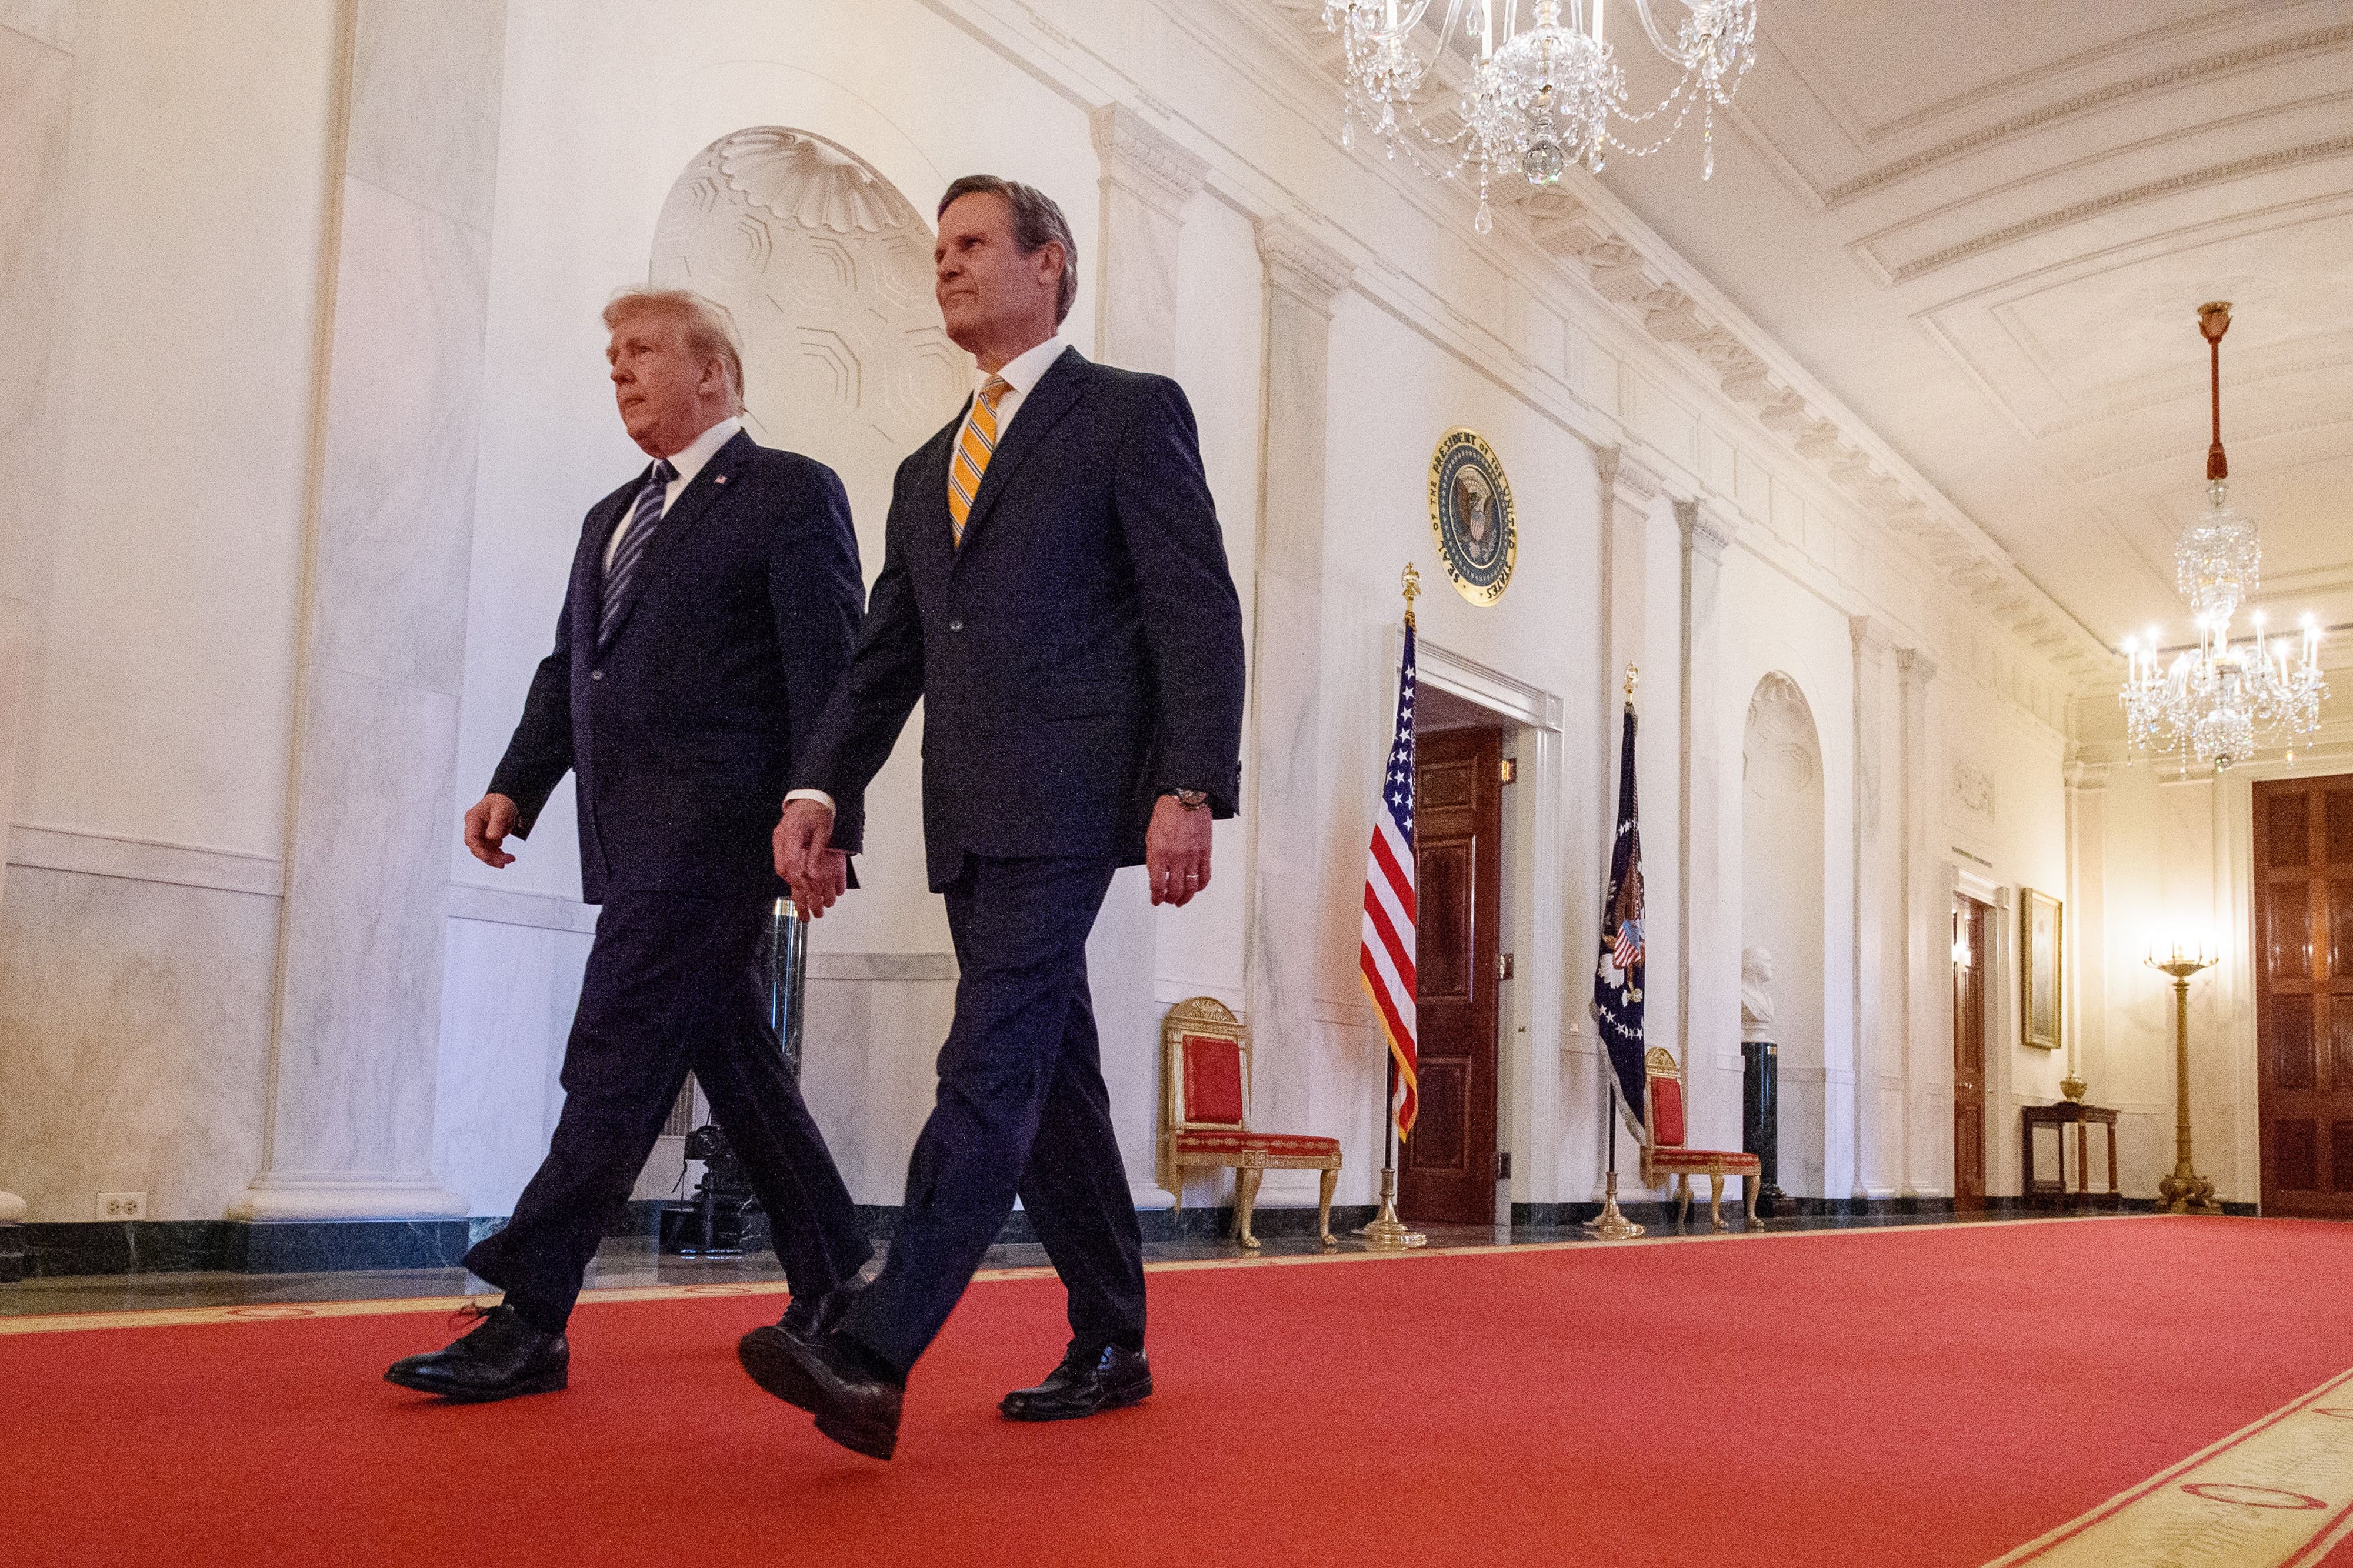 Tennessee Governor Bill Lee walks behind former President Donald Trump on a red carpet within the White House.